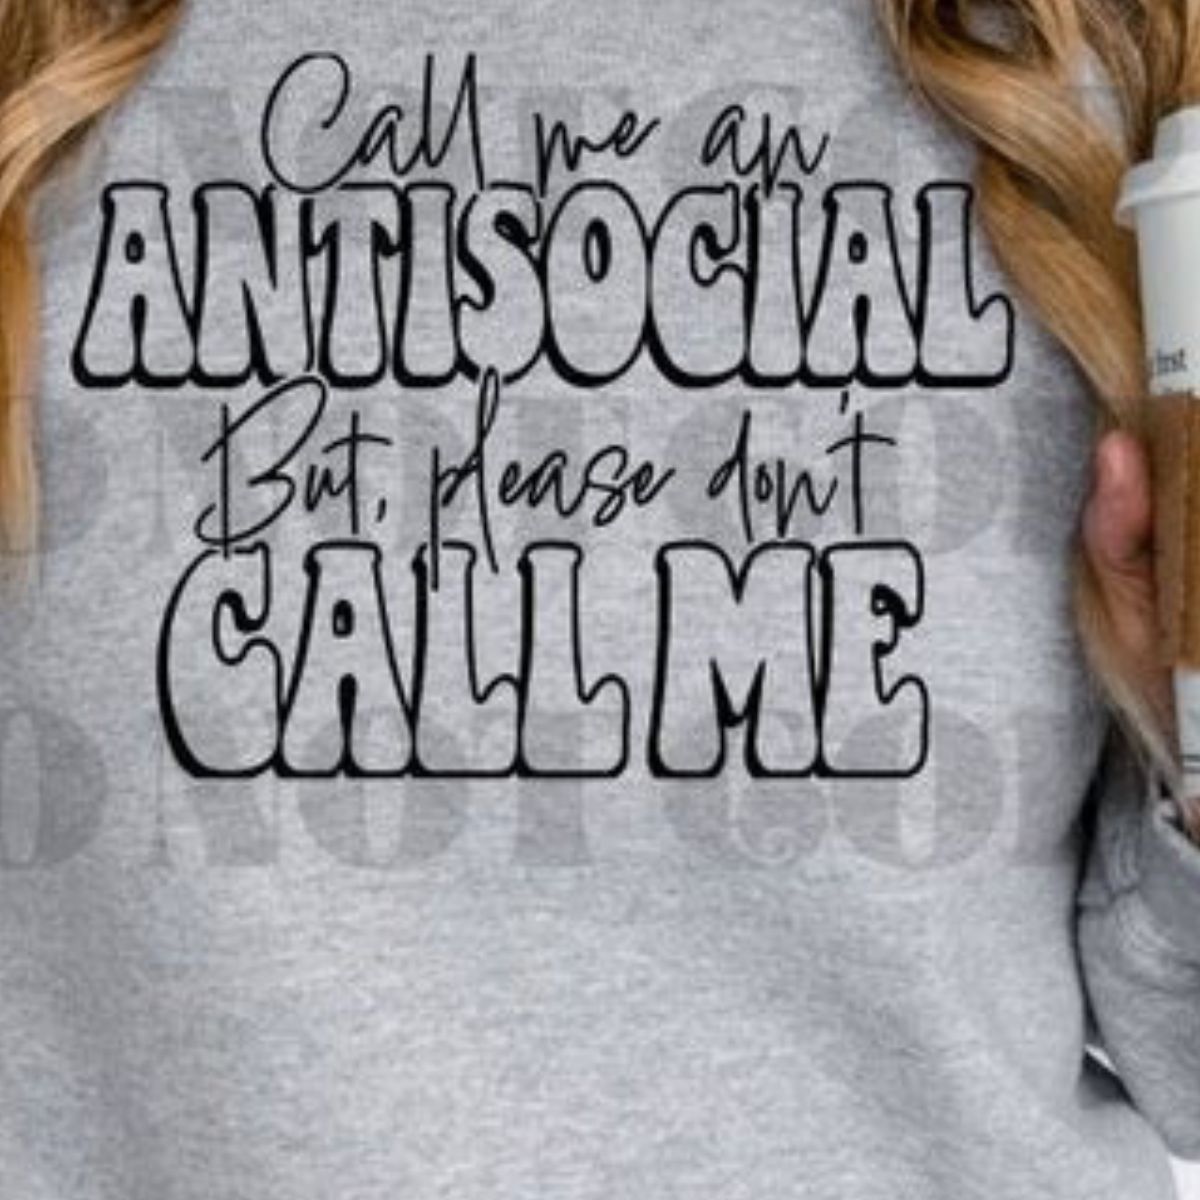 Call Me Antisocial but please don't Call Me